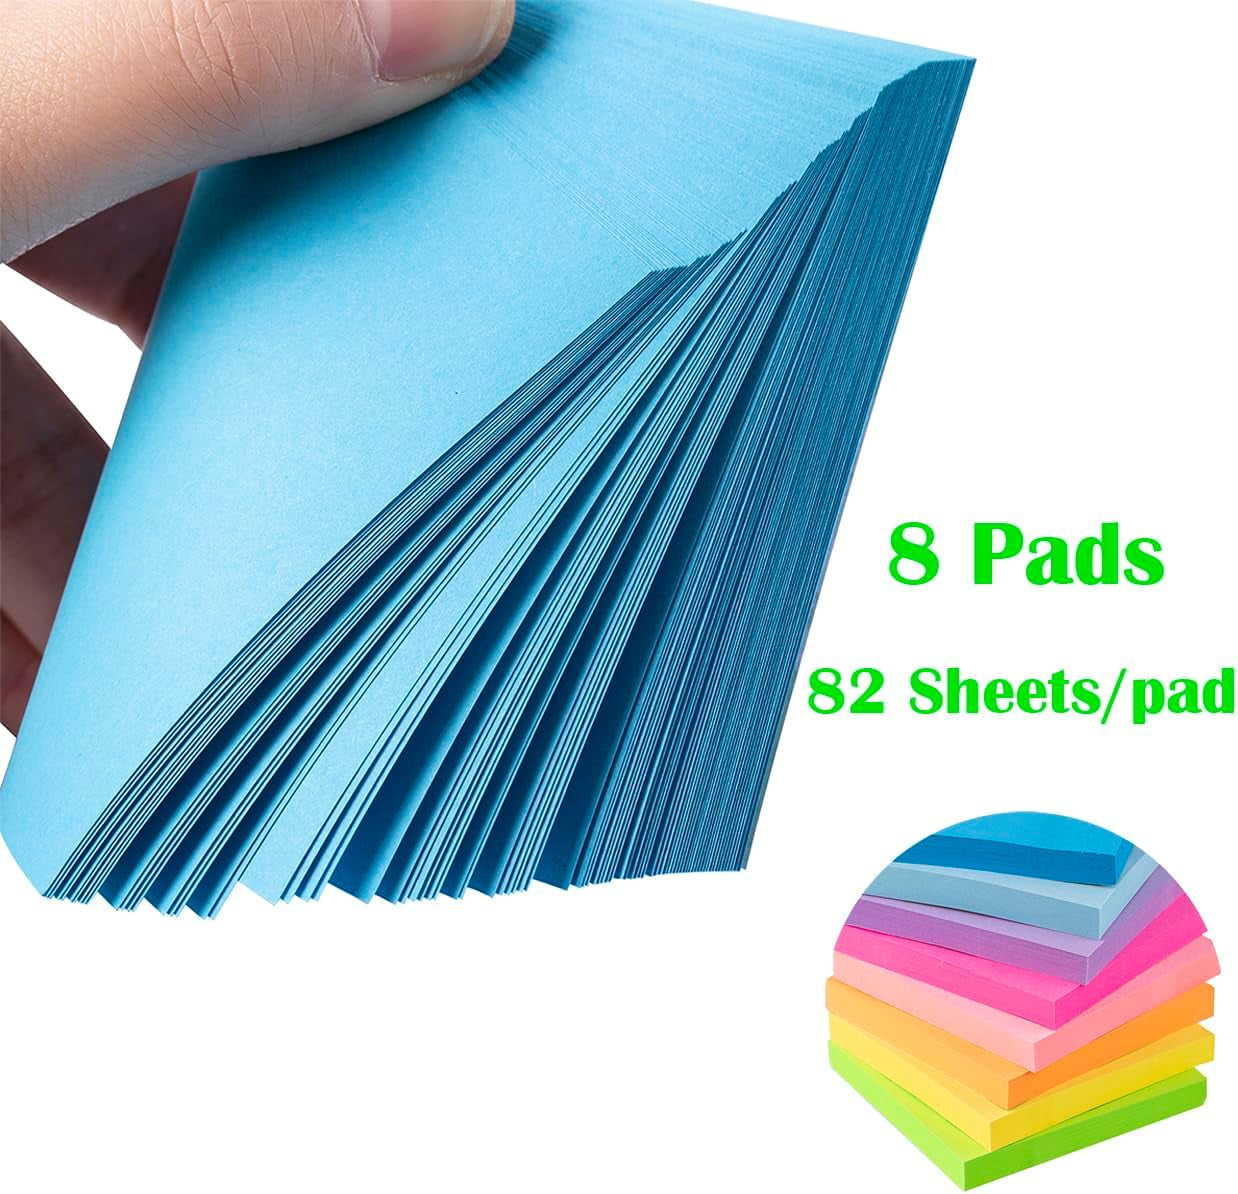 Sticky Notes 3X3 Inches,Bright Colors Self-Stick Pads, Easy to Post for Home, Office, Notebook, 82 Sheets/Pad